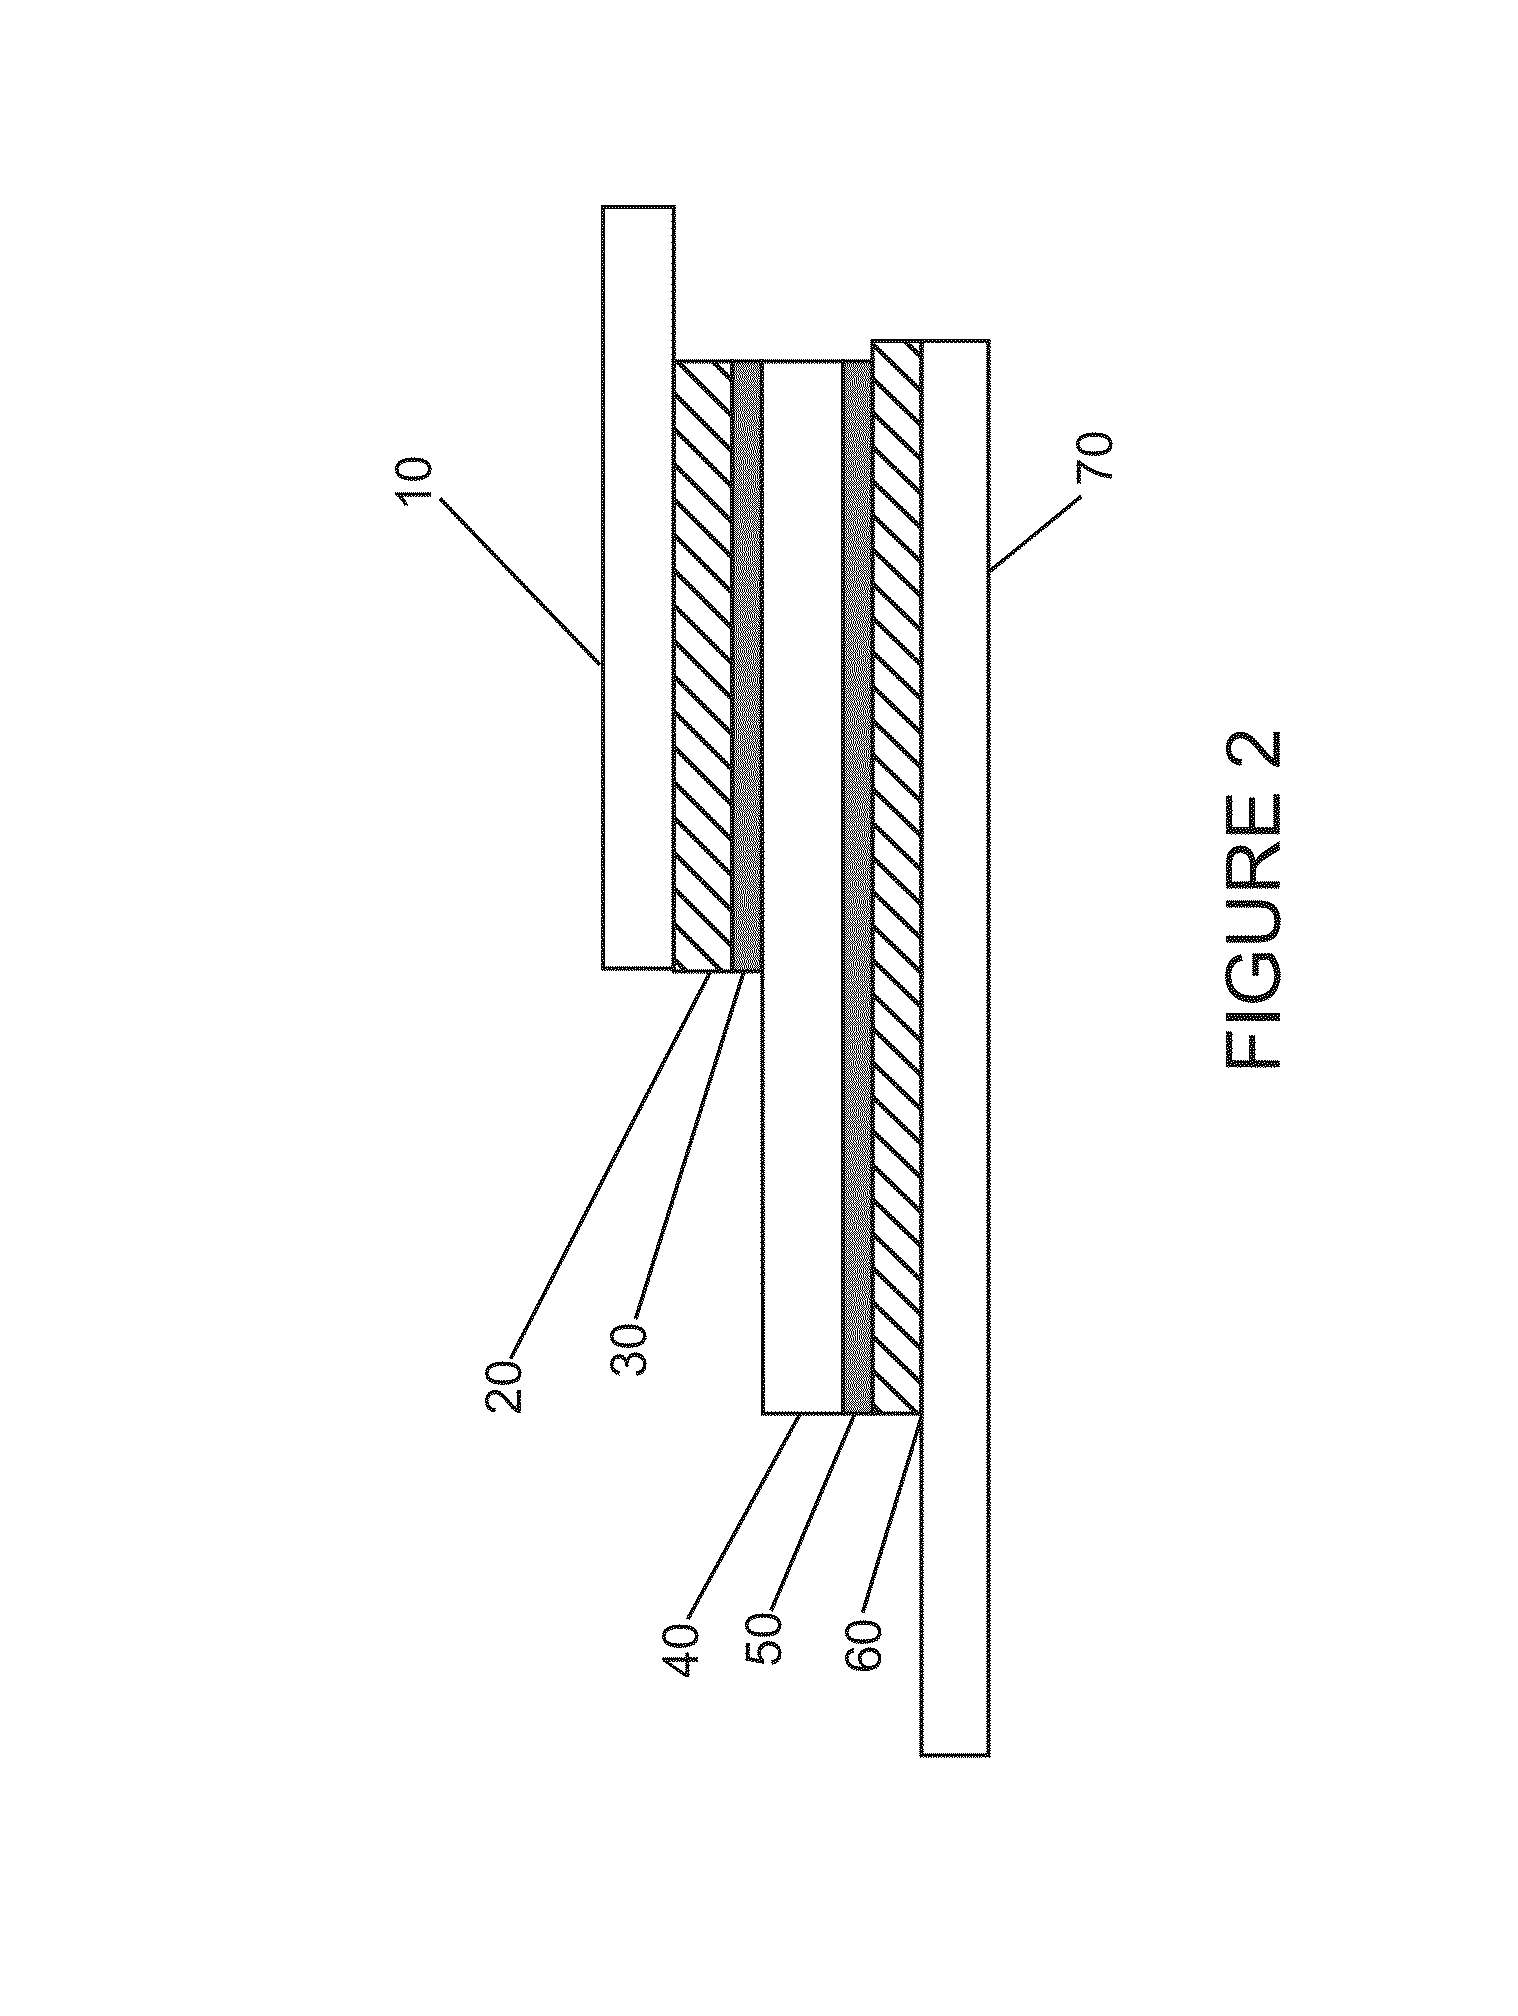 Semiconductor packaging containing sintering die-attach material